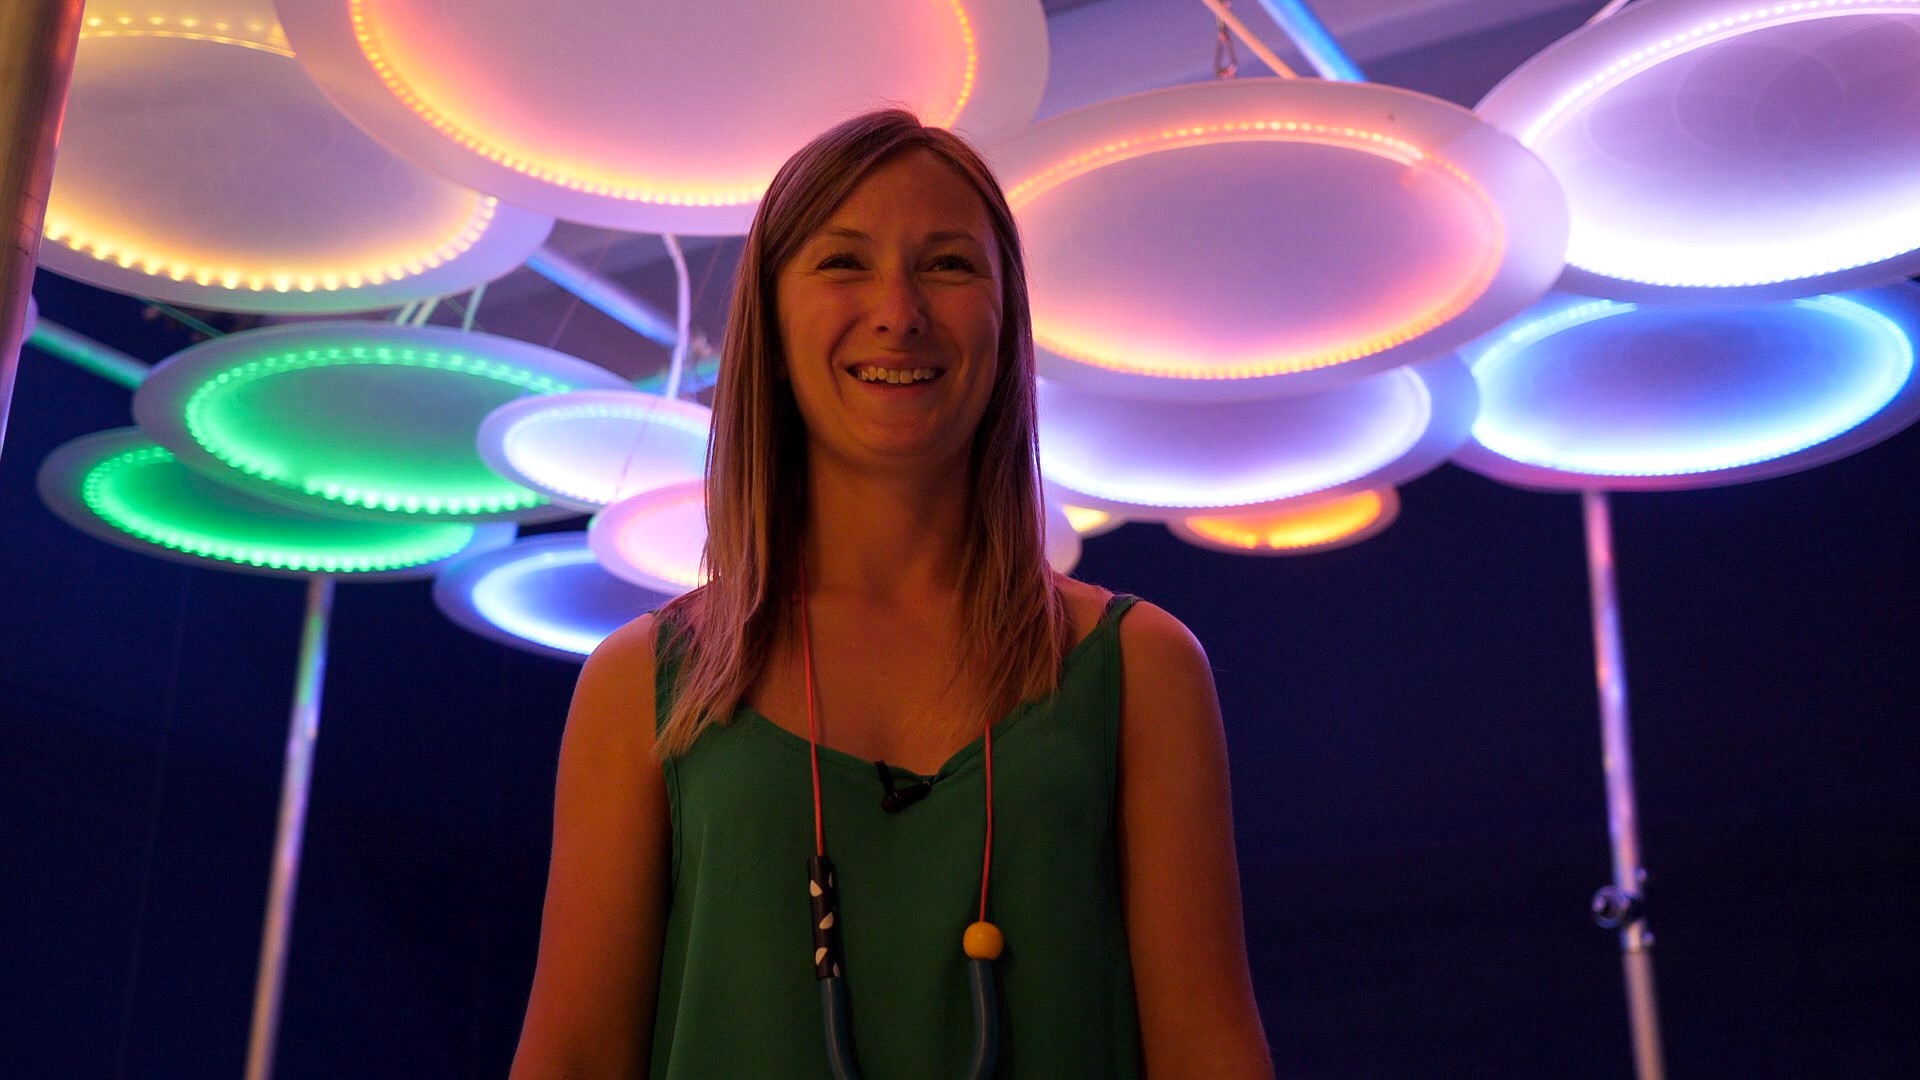 Artist Julia Snowdin surrounded by neon lights.